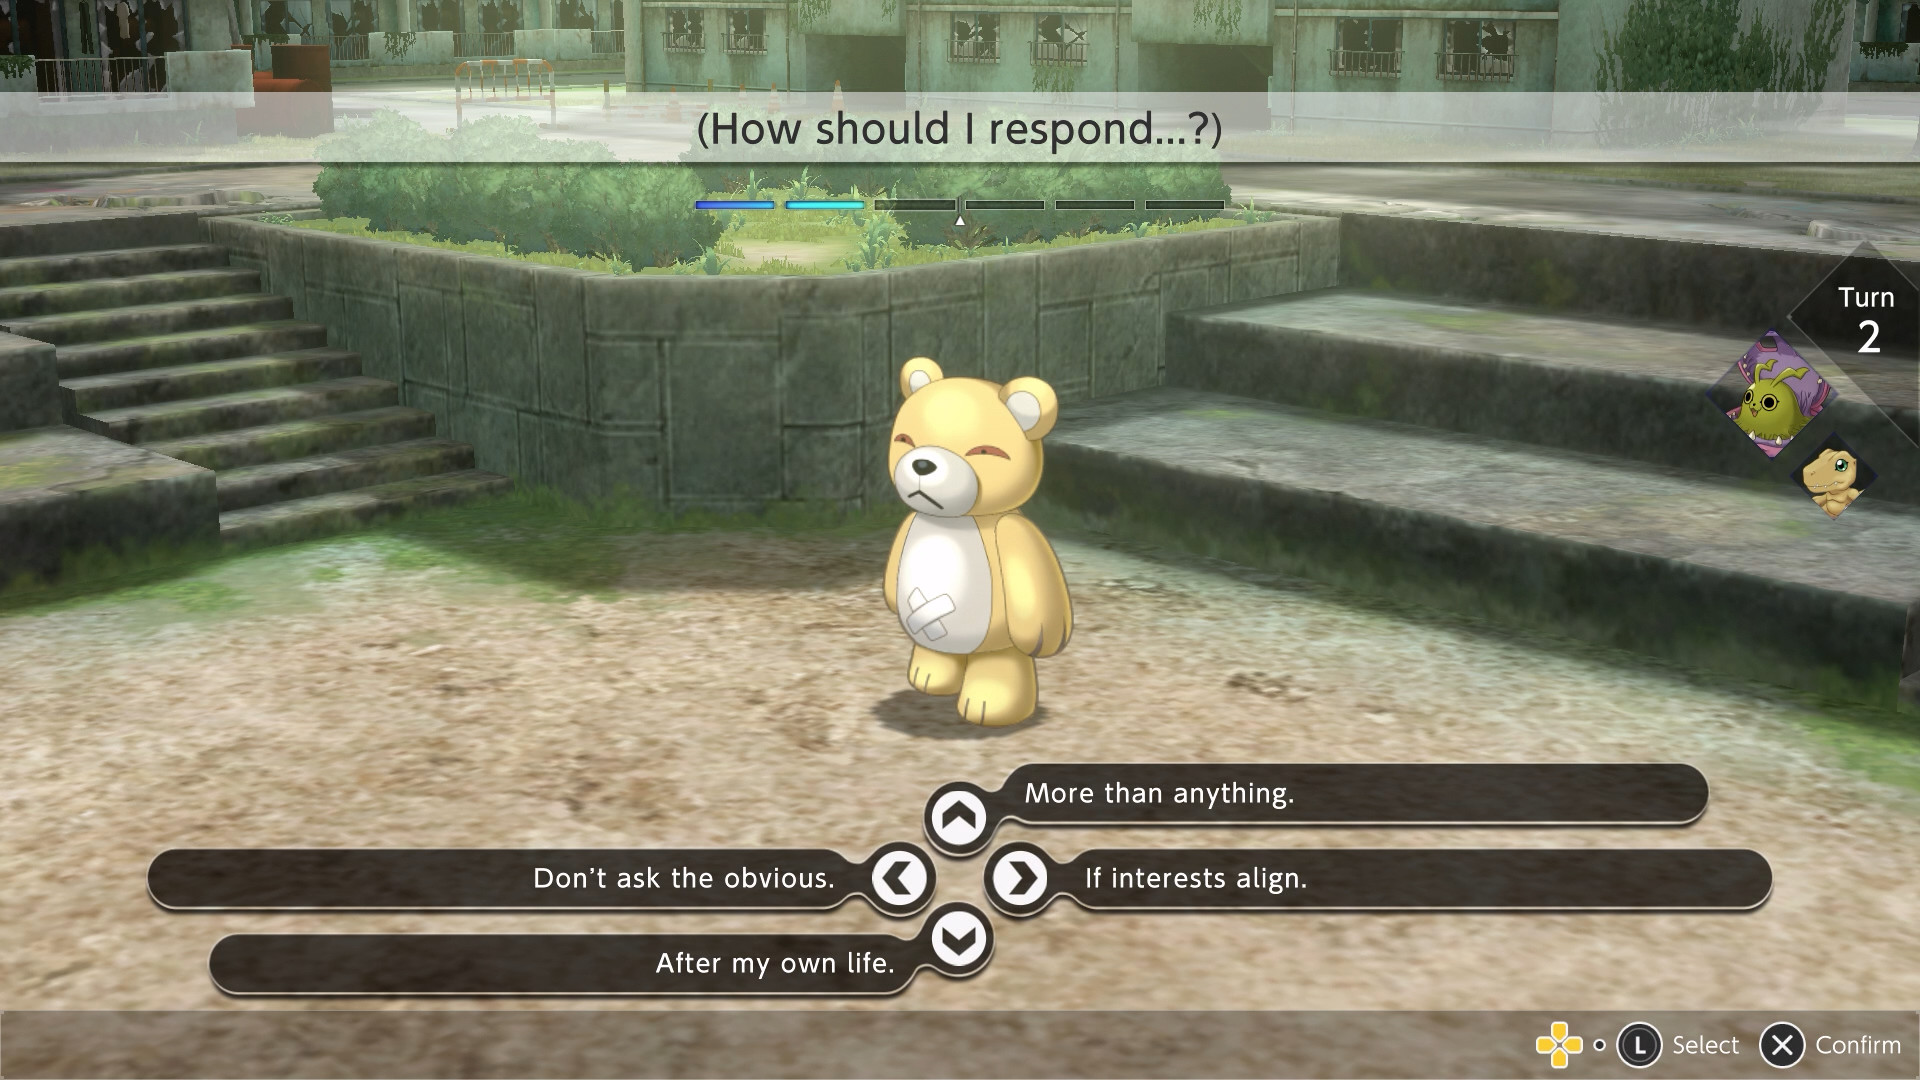 Monzaemon in 'Digimon Survive,' which uses conversations to fuel its Karma system. In the image, he's standing in front of stone steps. There are multiple responses the player can choose from listed beneath him.